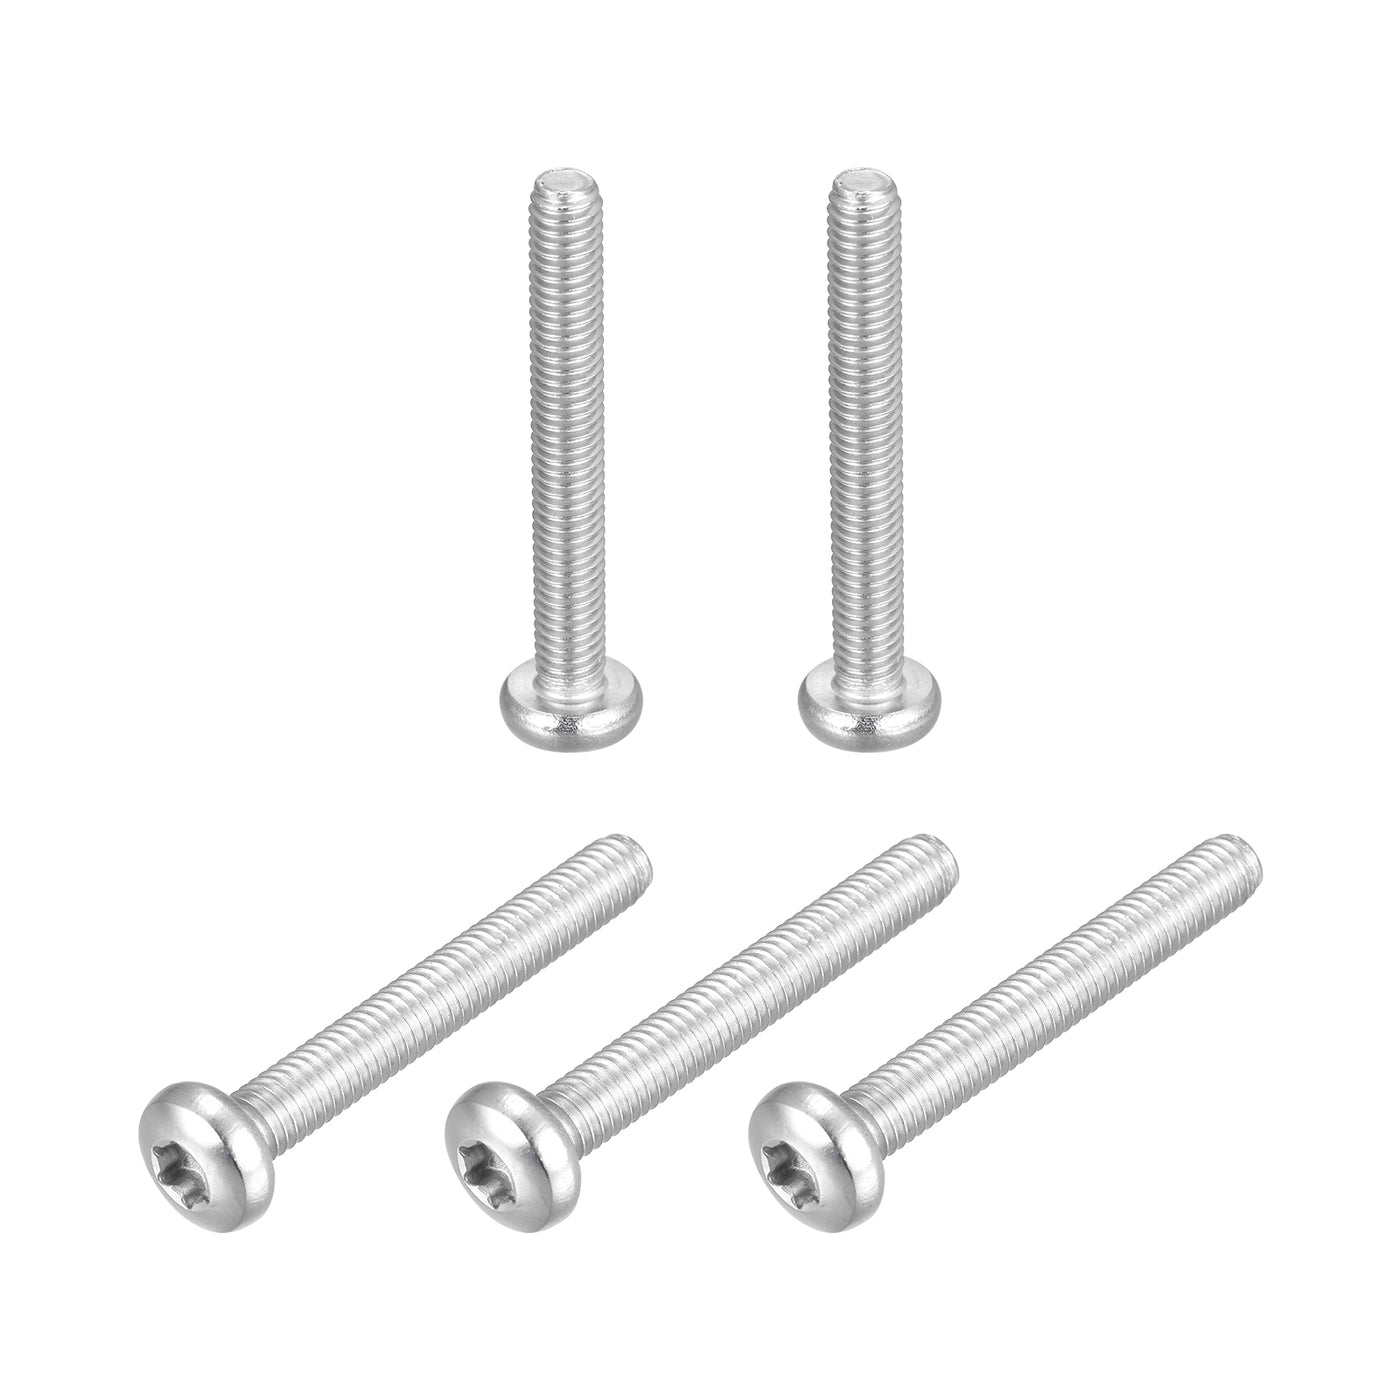 uxcell Uxcell M6x45mm Torx Security Machine Screws, 5pcs 316 Stainless Steel Pan Head Screw